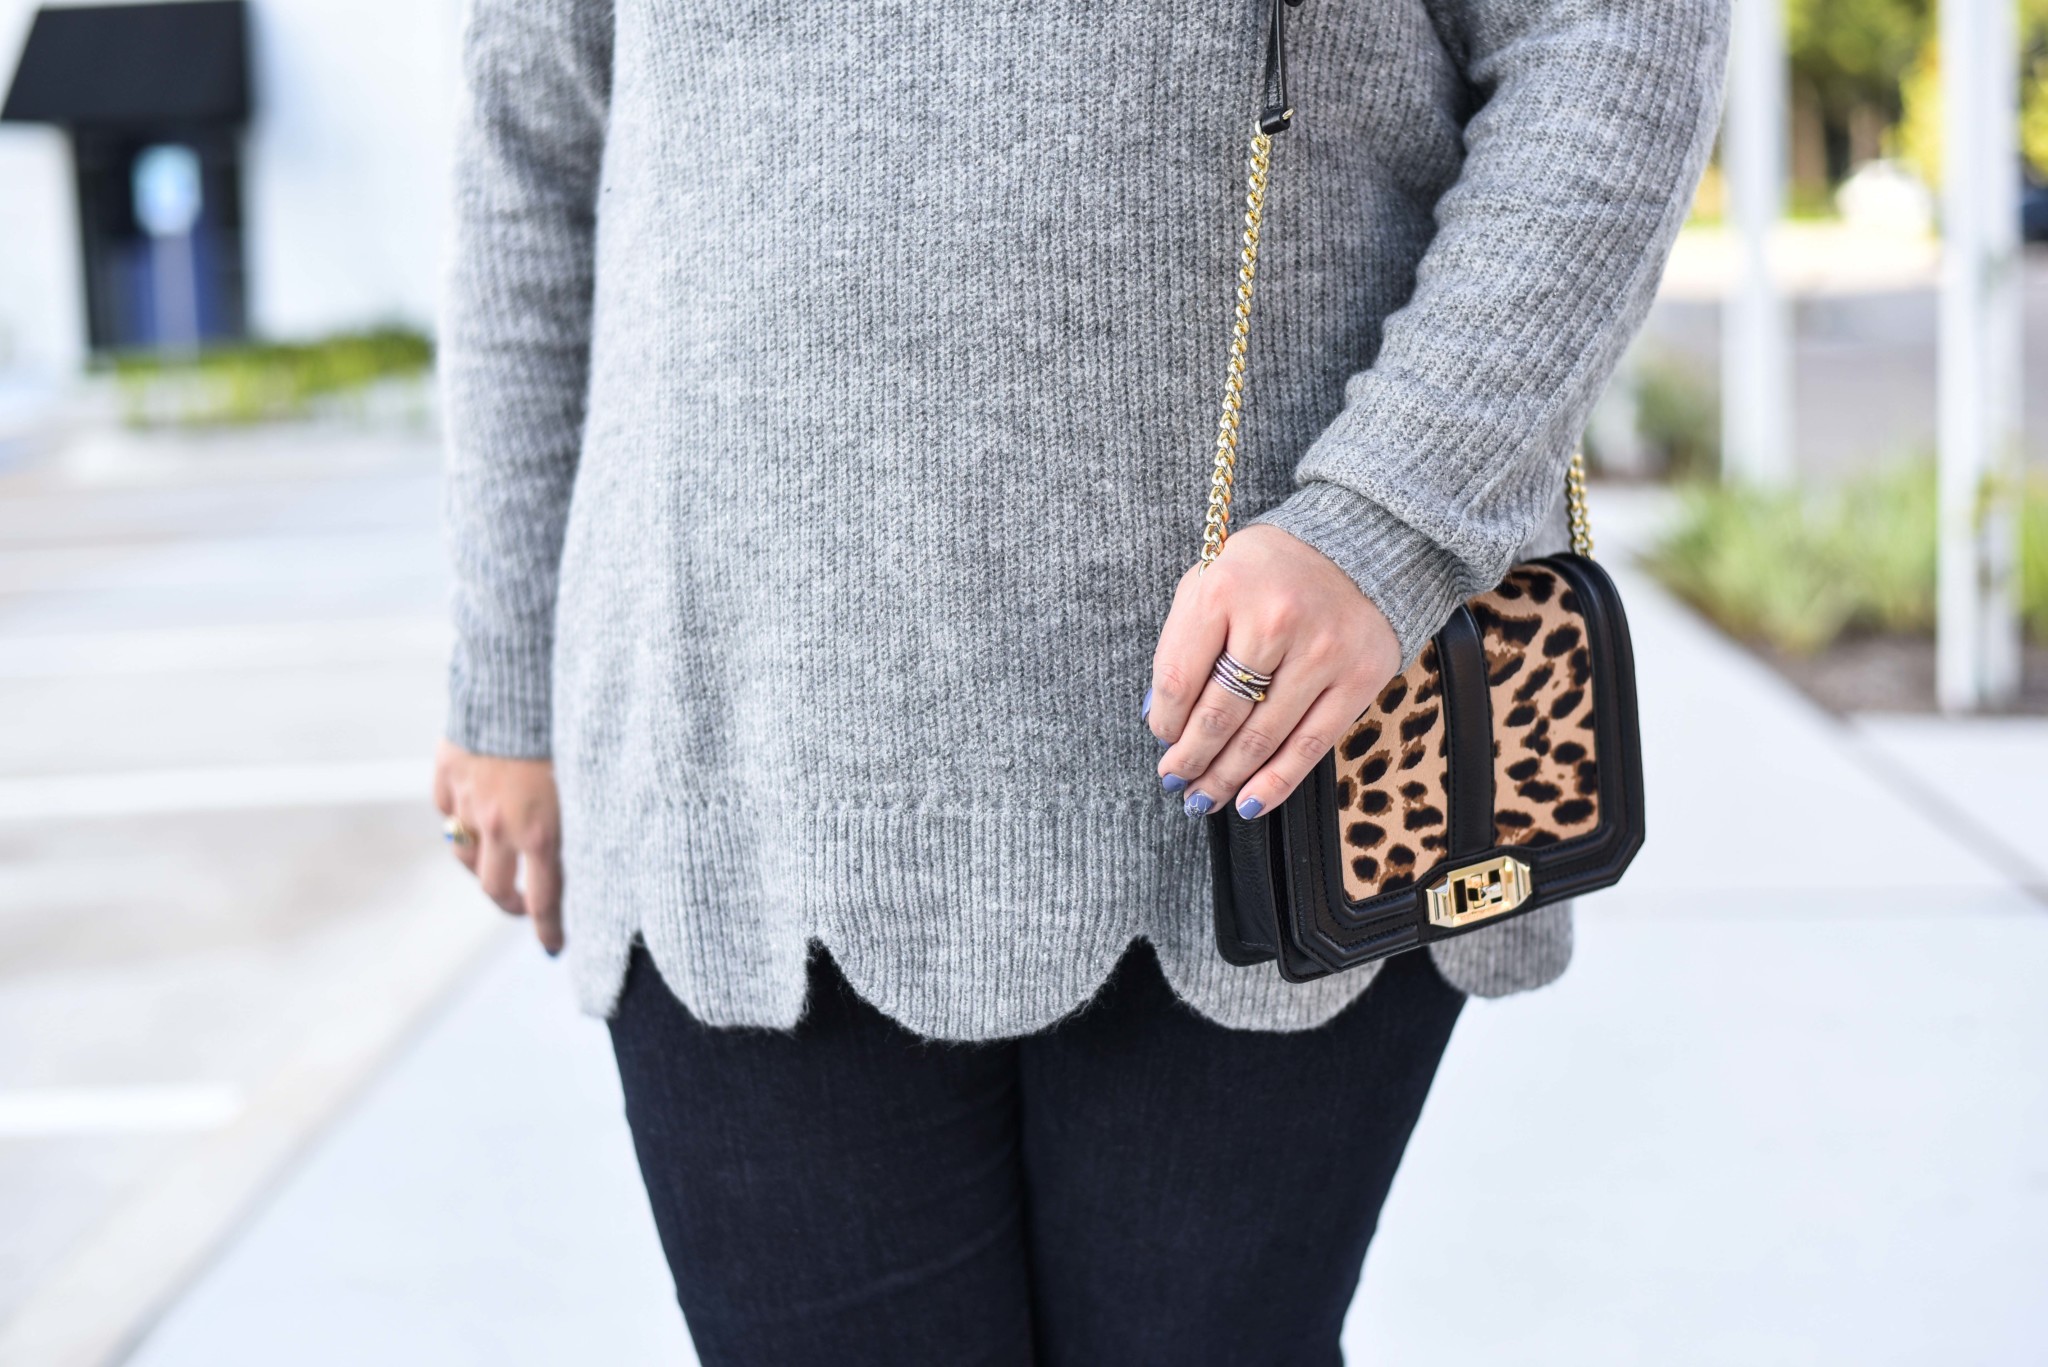 Gorgeous scallop detail on this grey sweater from Lane Bryant